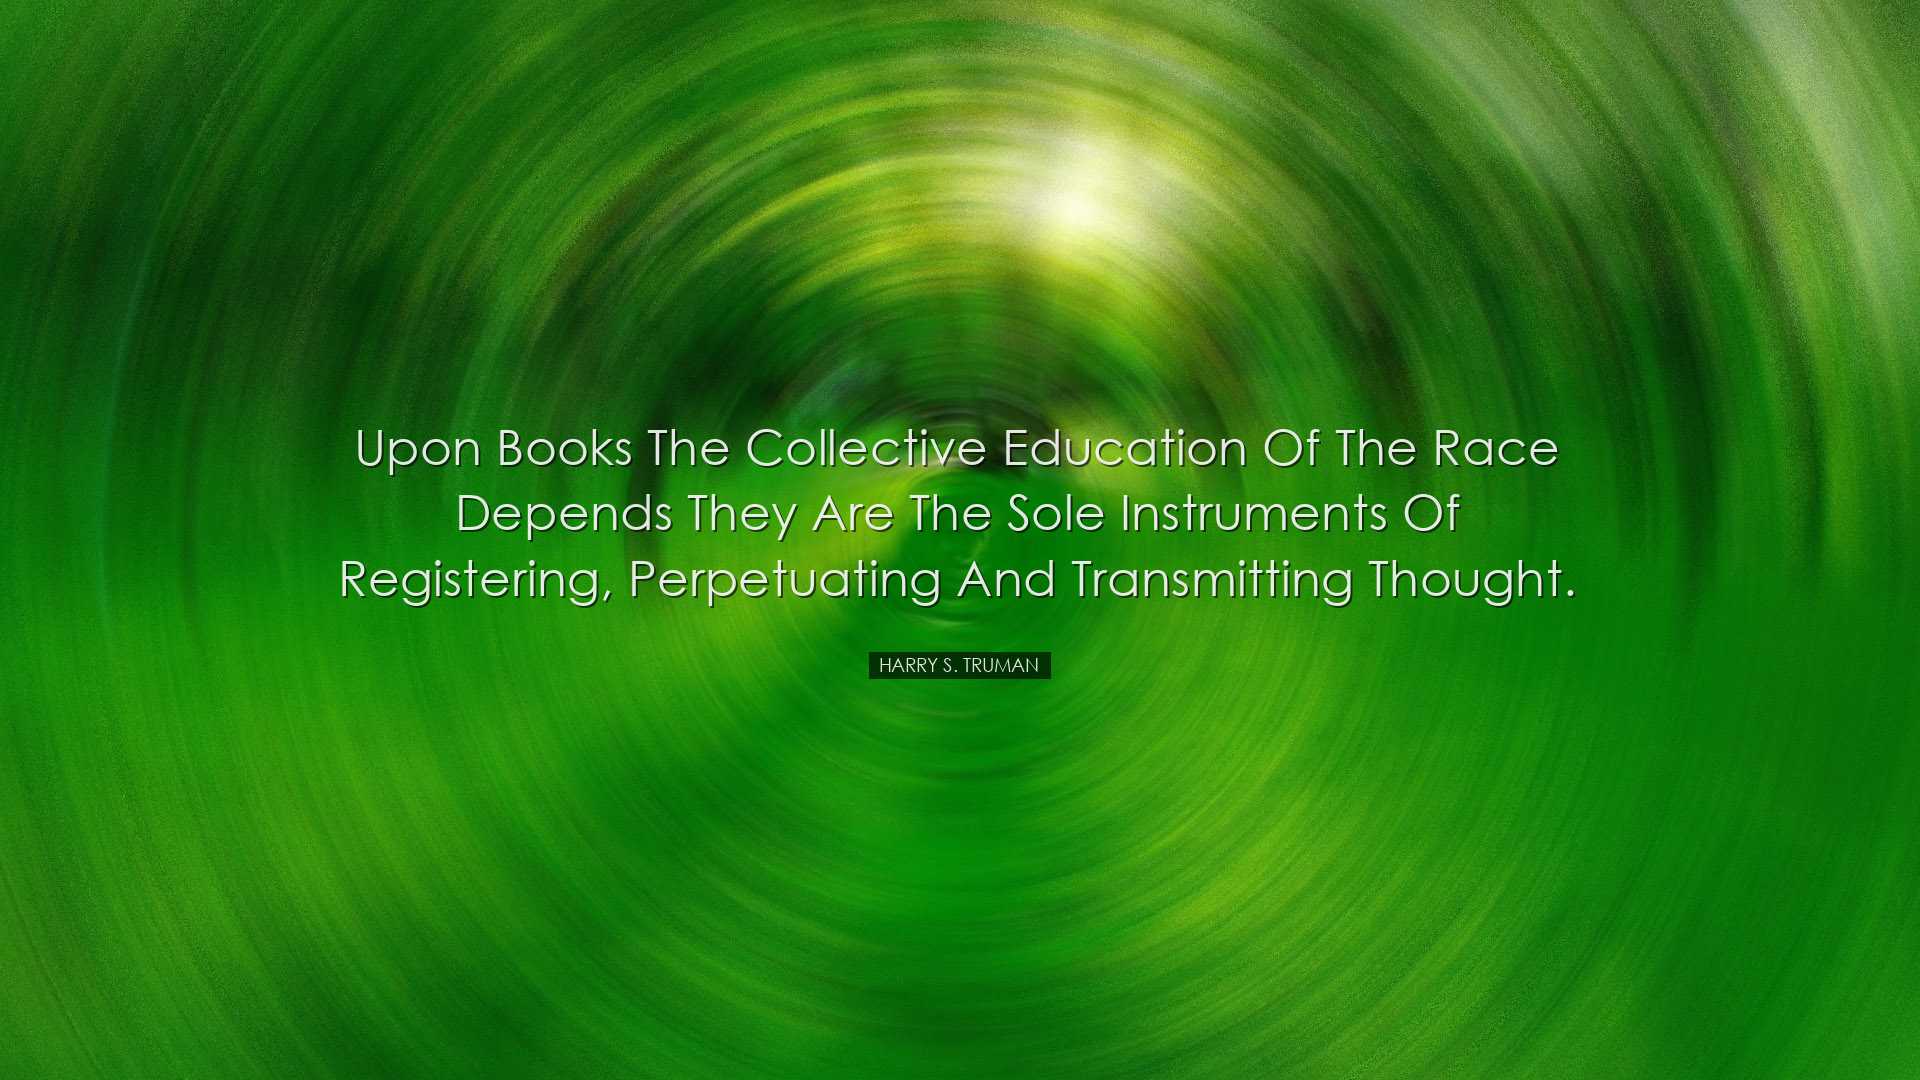 Upon books the collective education of the race depends they are t